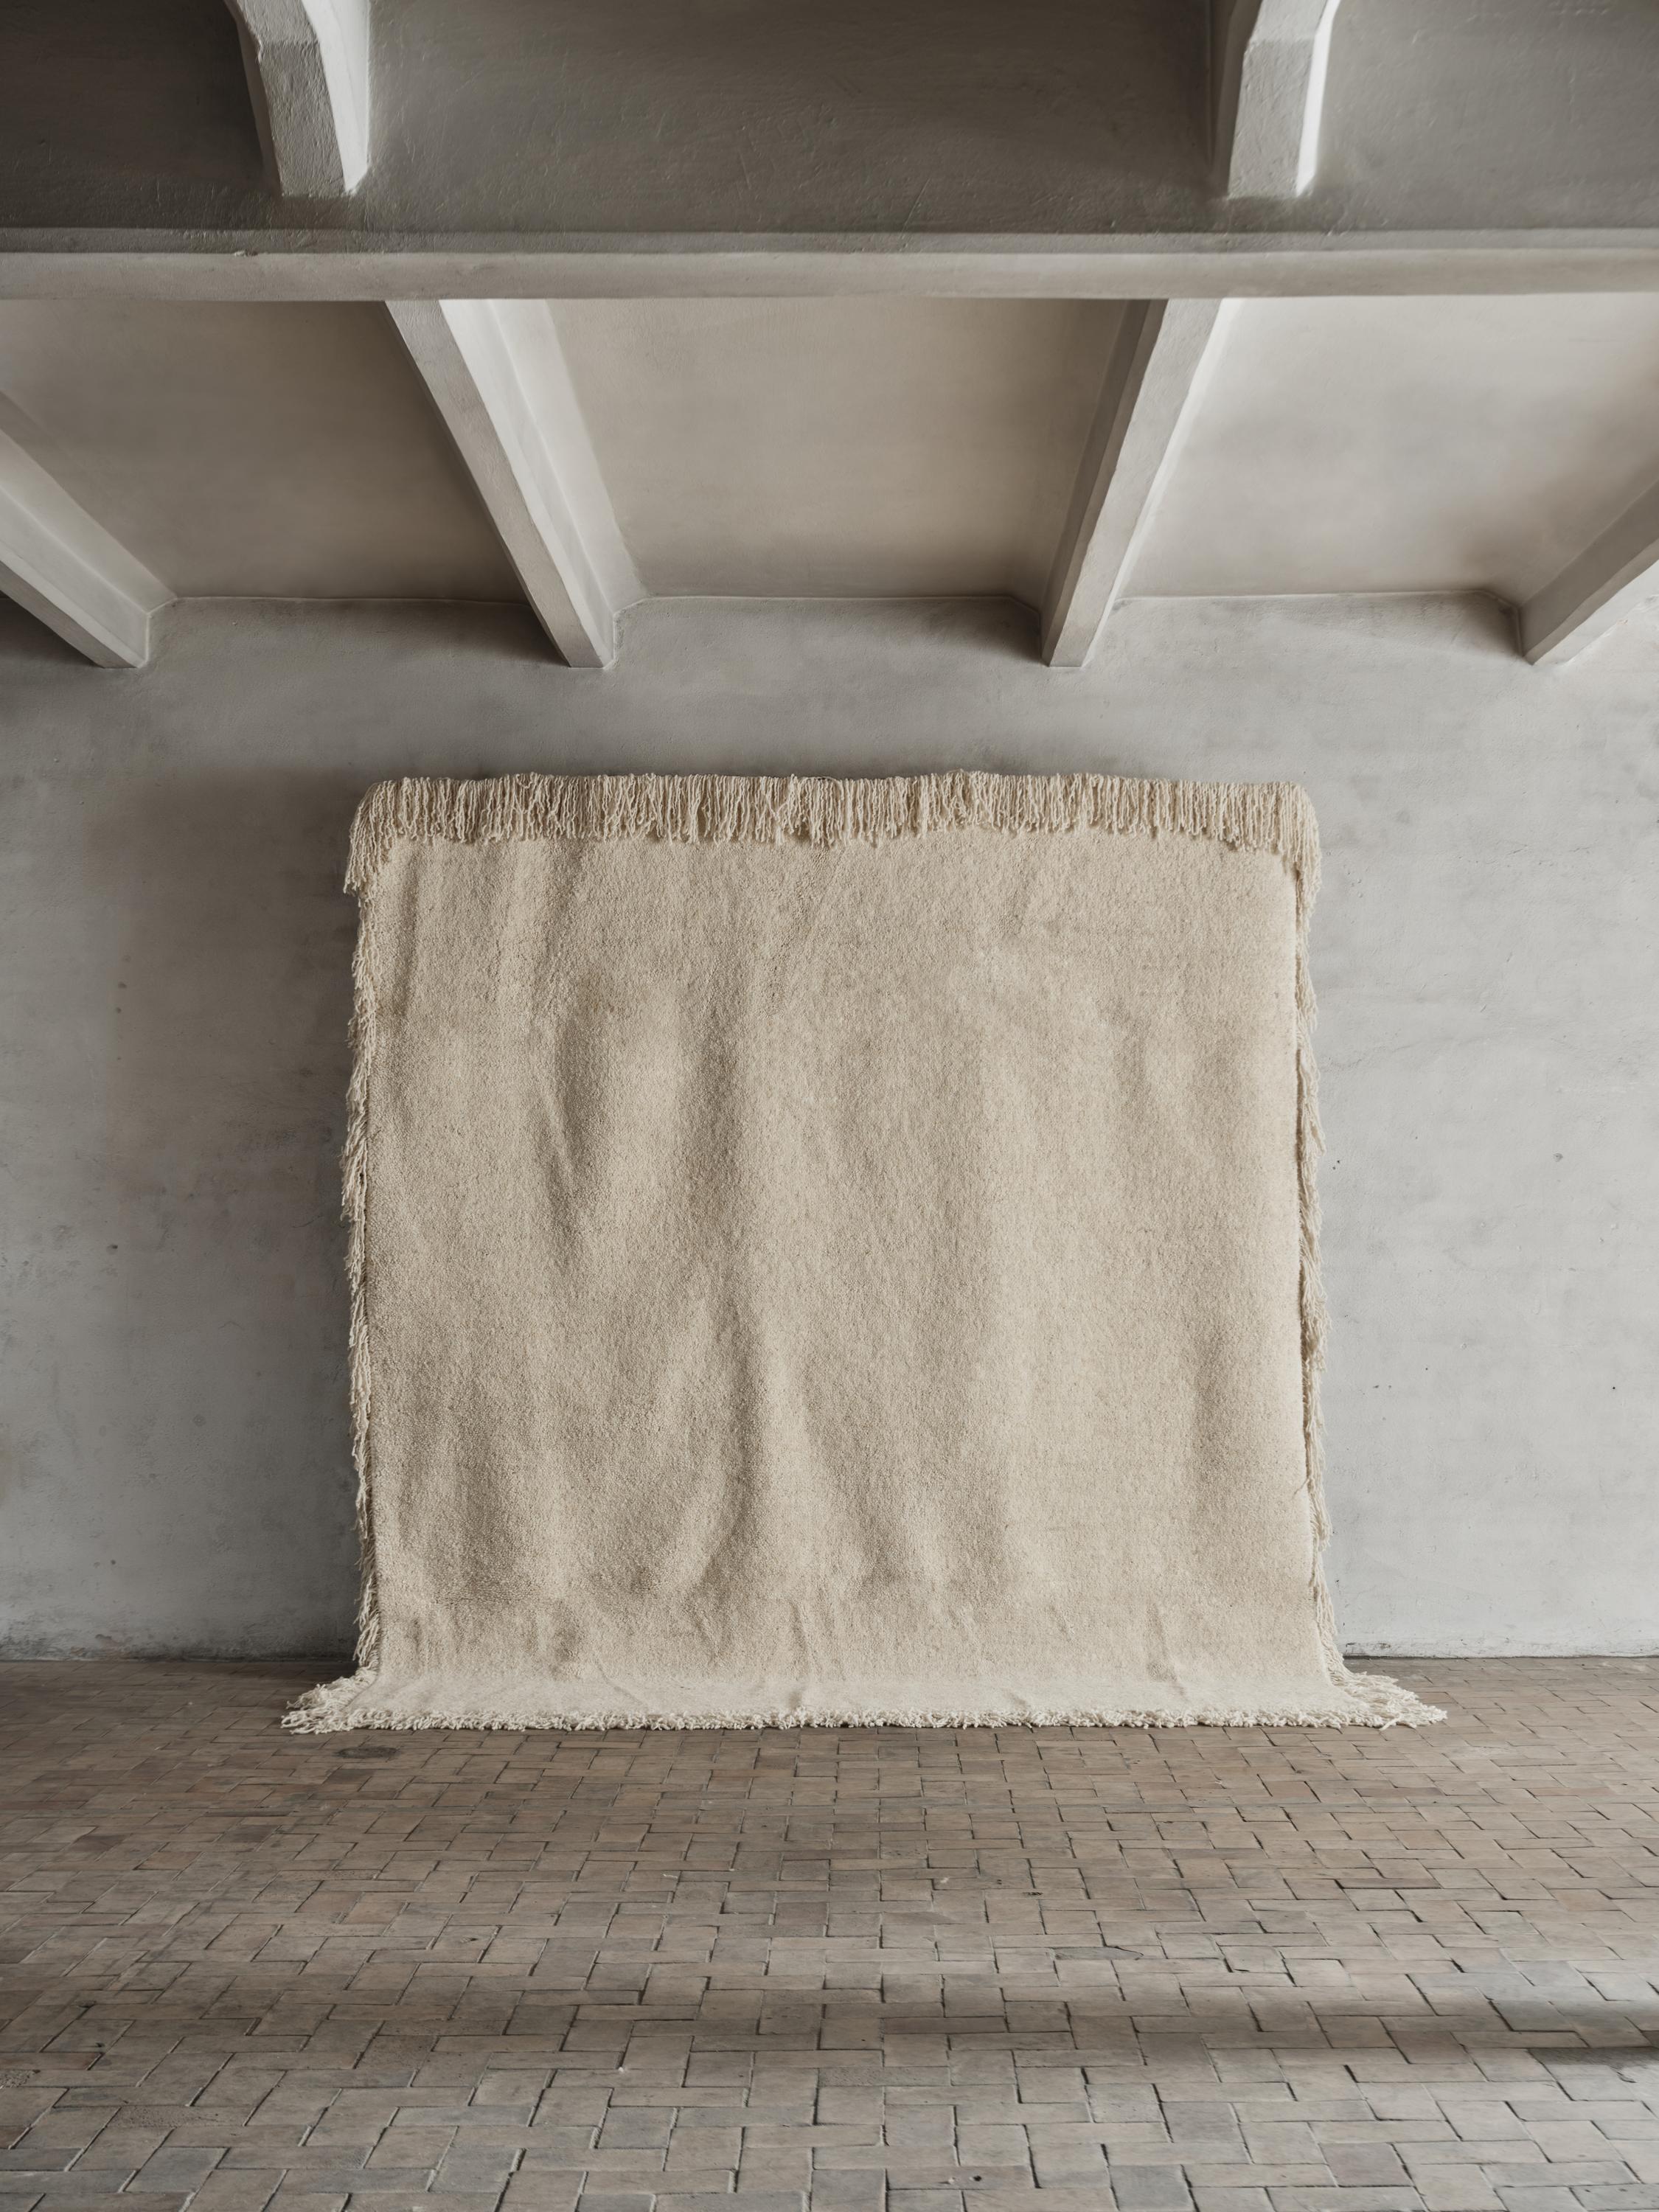 No.10 Rug by Cappelen Dimyr
Dimensions: D290 x H350 cm
Materials: 85% wool 15% cotton

no.10 is an elevated yet classic rug with exaggerated details. The heavy and compact rug in luxury chunky wool is cut in a short pile with bold and curly